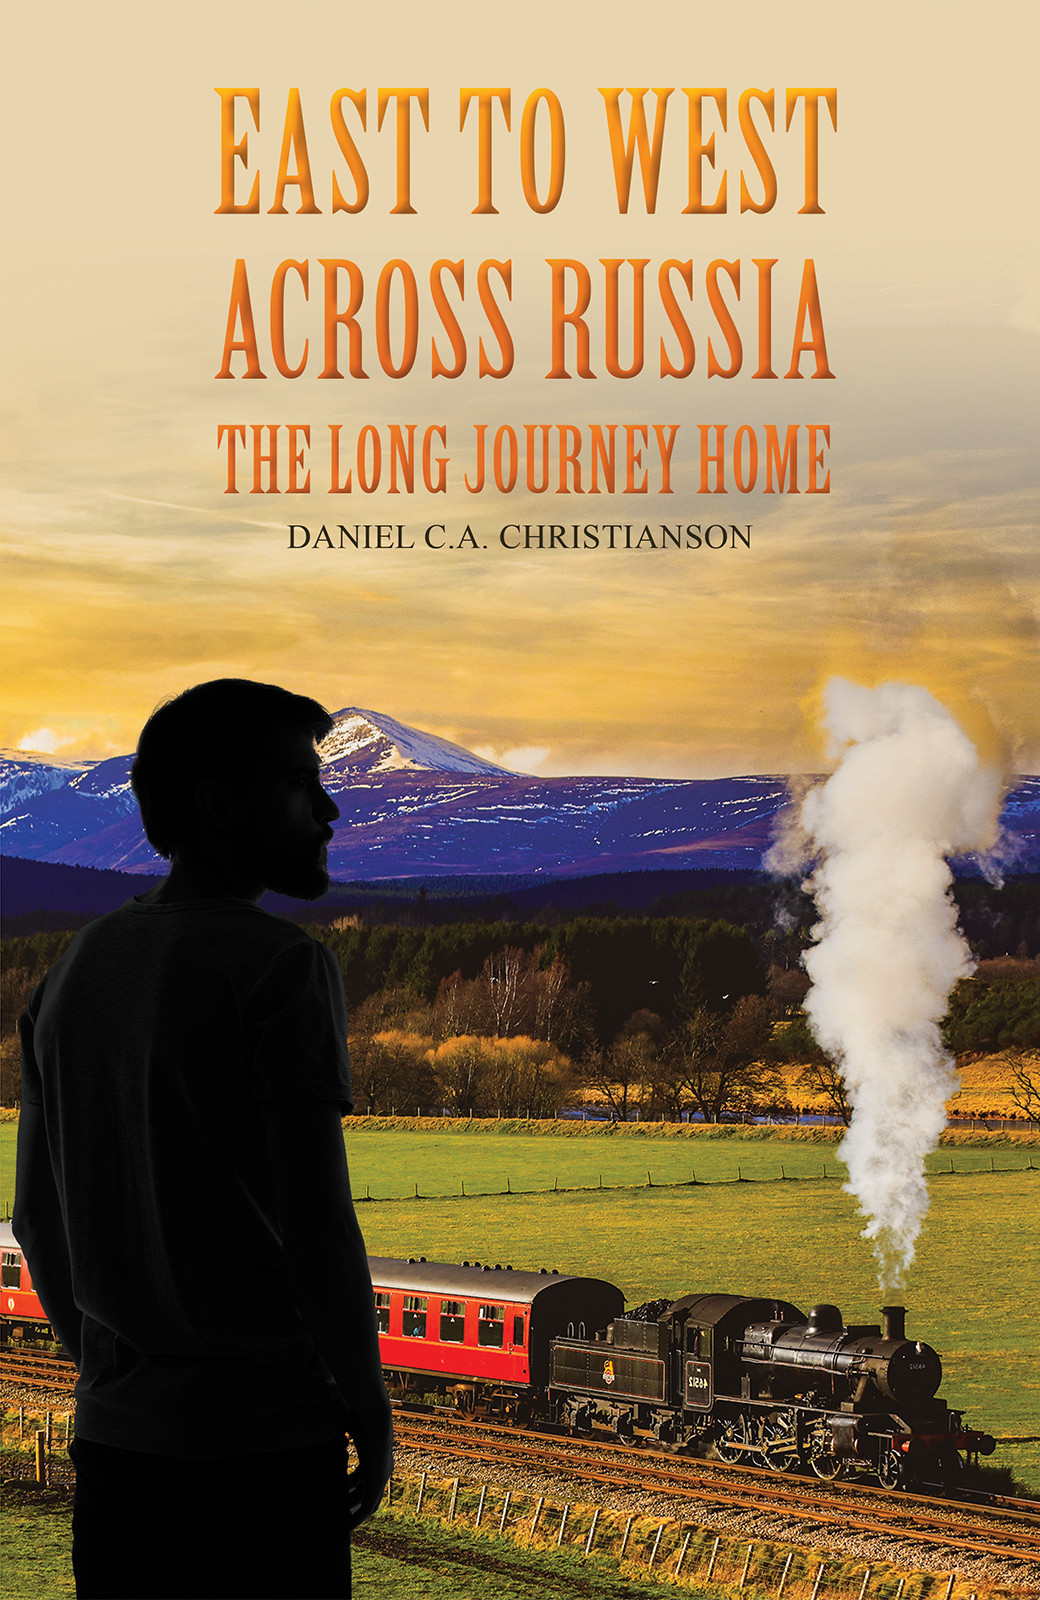 East to West across Russia: The Long Journey Home